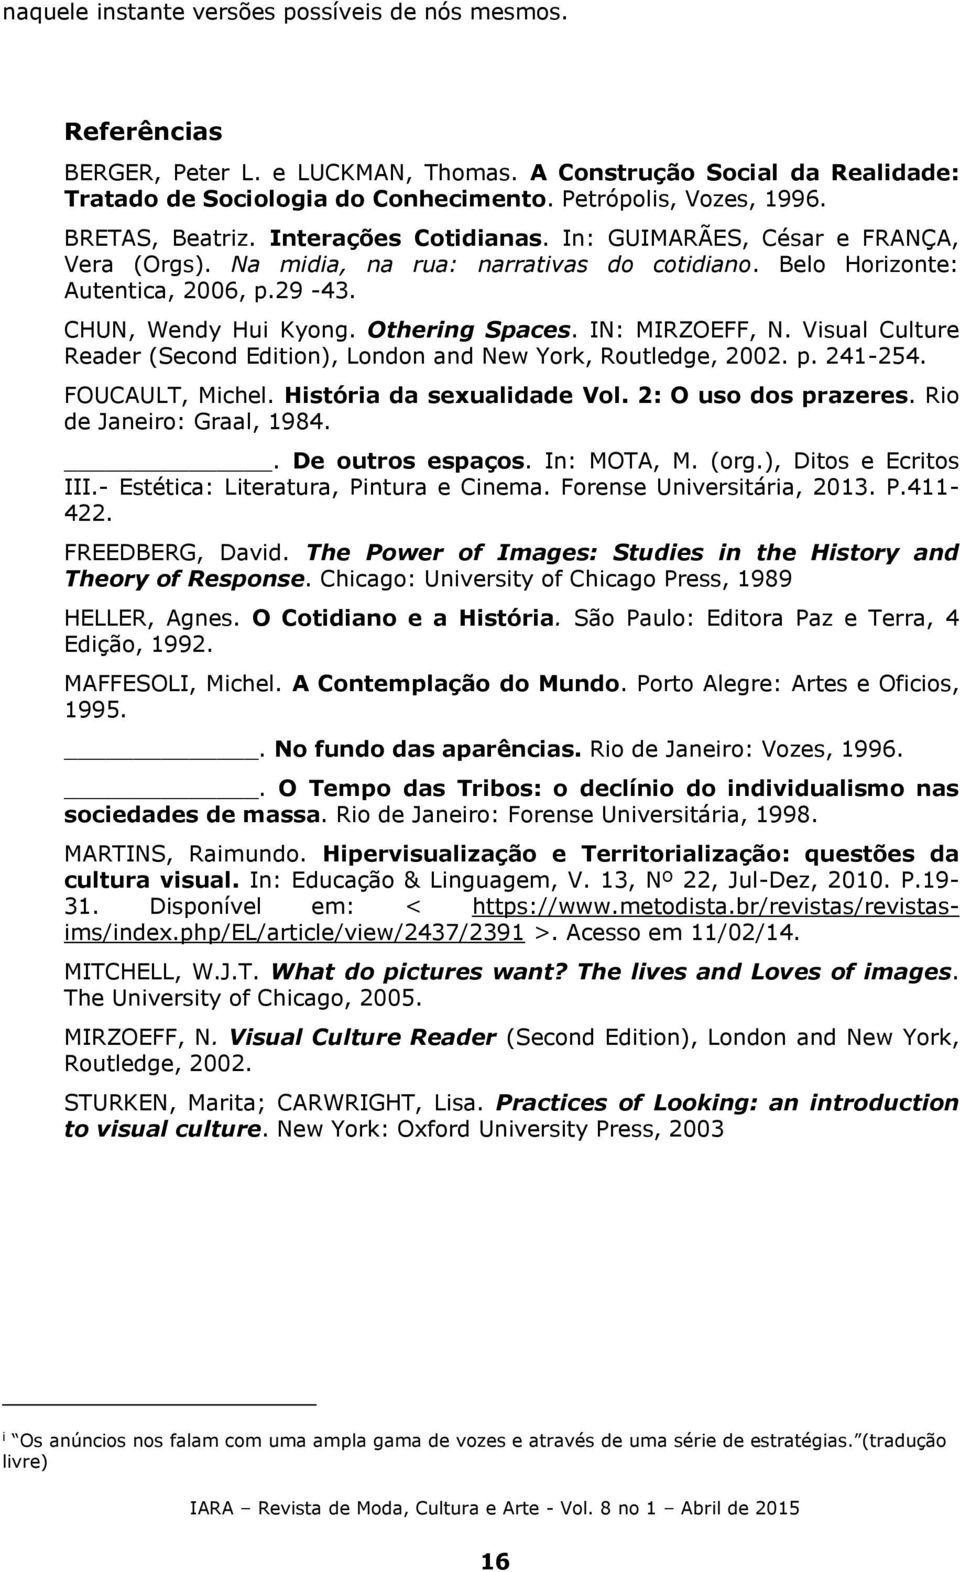 Othering Spaces. IN: MIRZOEFF, N. Visual Culture Reader (Second Edition), London and New York, Routledge, 2002. p. 241-254. FOUCAULT, Michel. História da sexualidade Vol. 2: O uso dos prazeres.